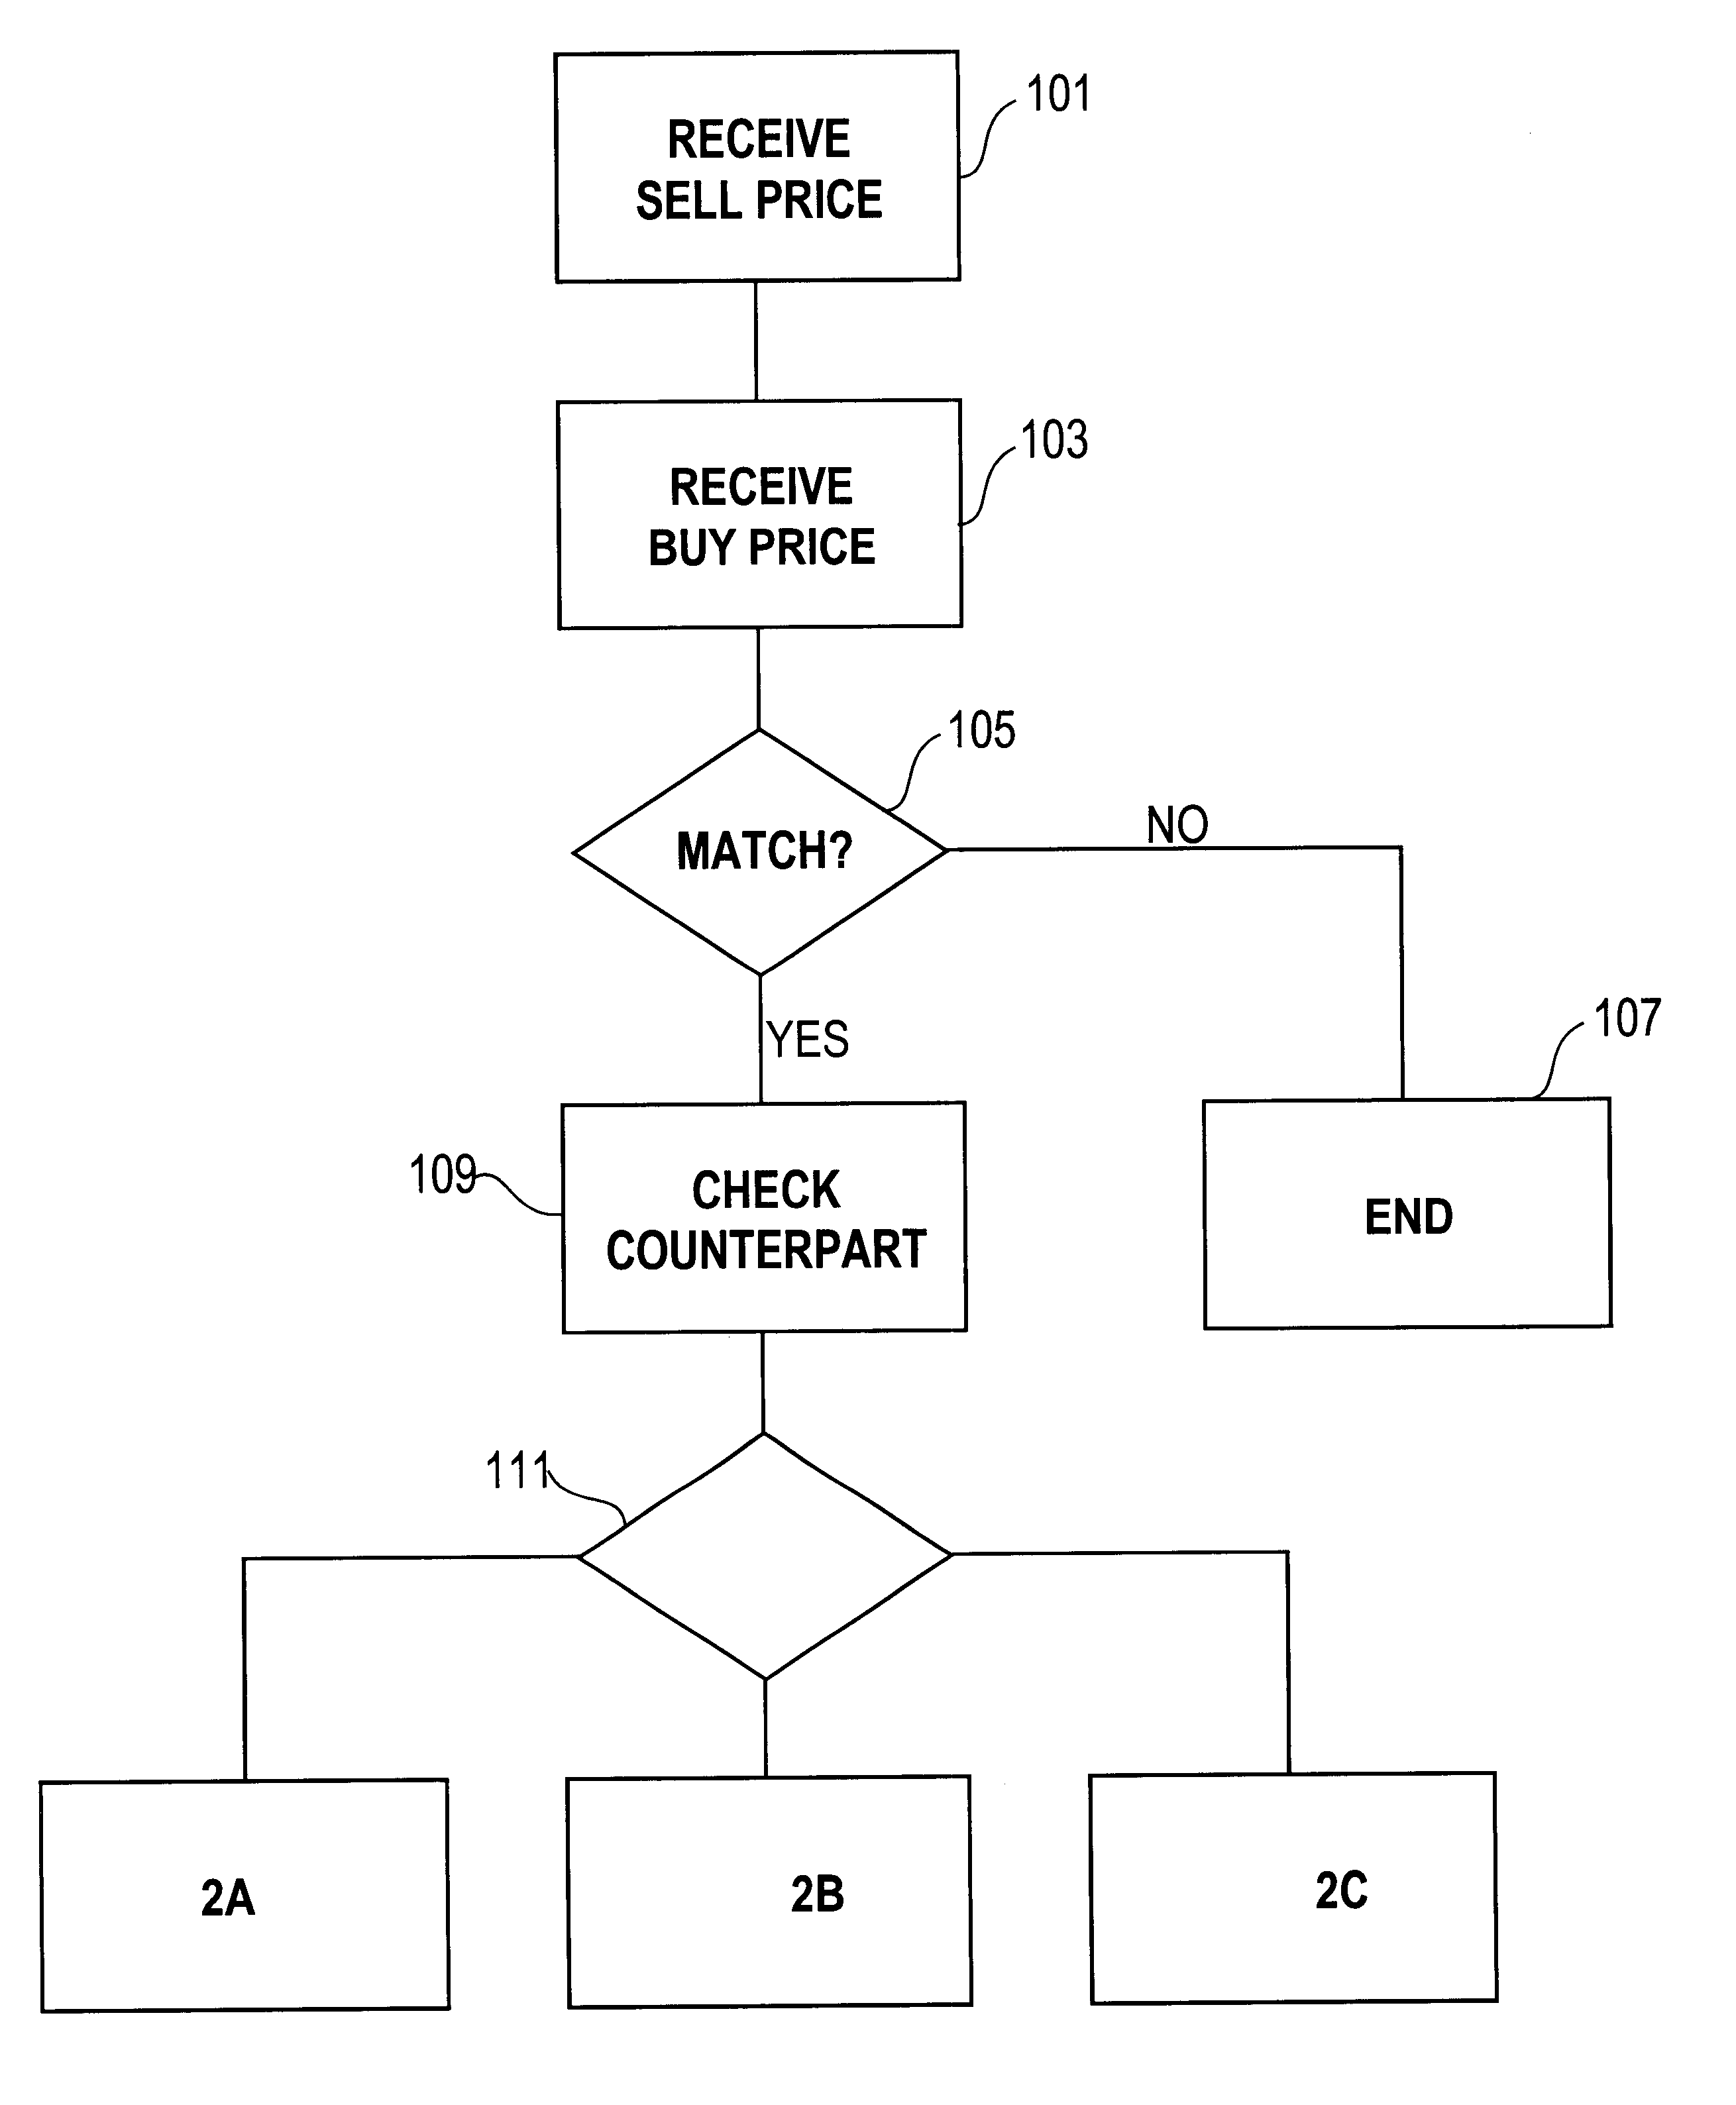 Automated exchange for matching bids between a party and a counterparty based on a relationship between the counterparty and the exchange